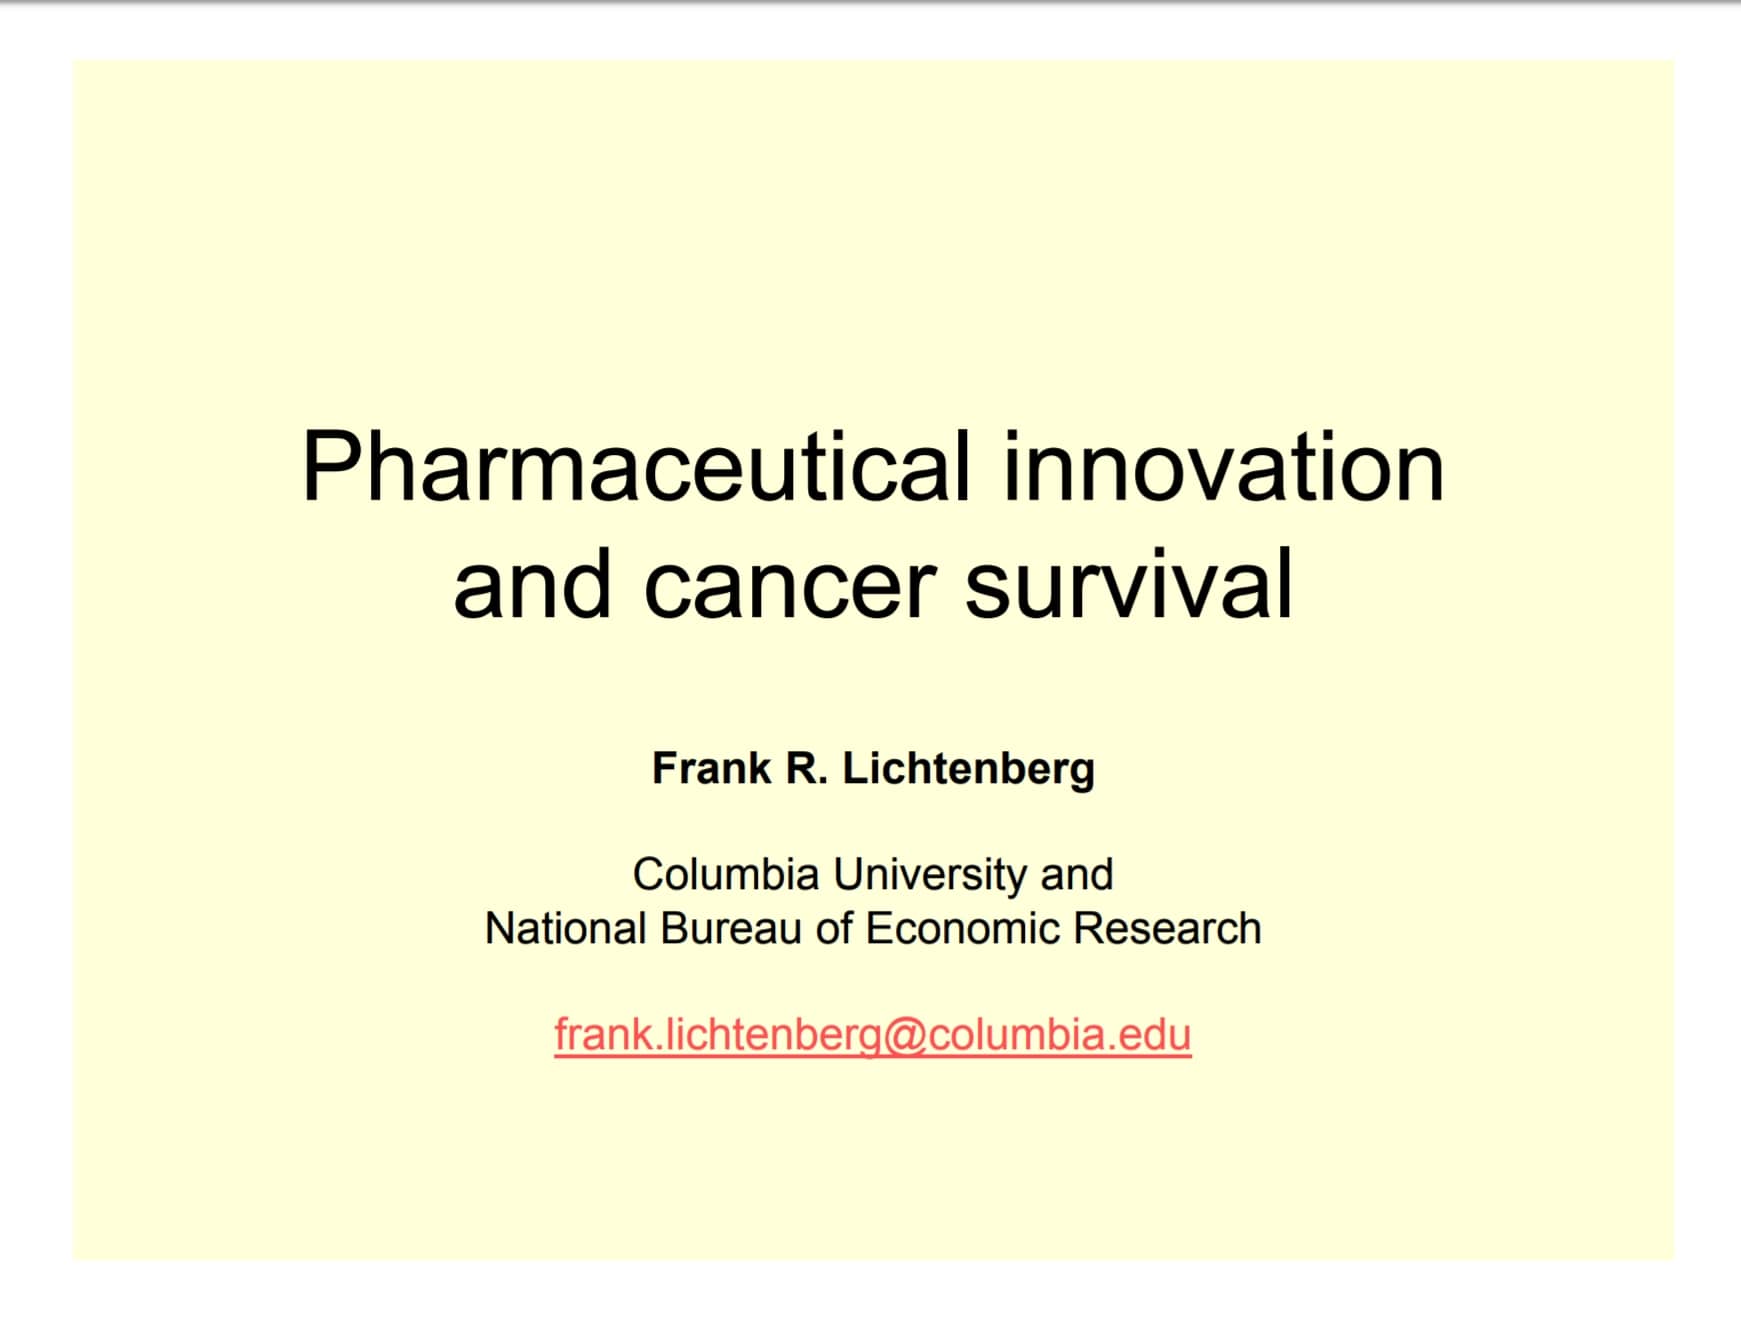 "Pharmaceutical Innovation and Cancer Survival" presentation cover.